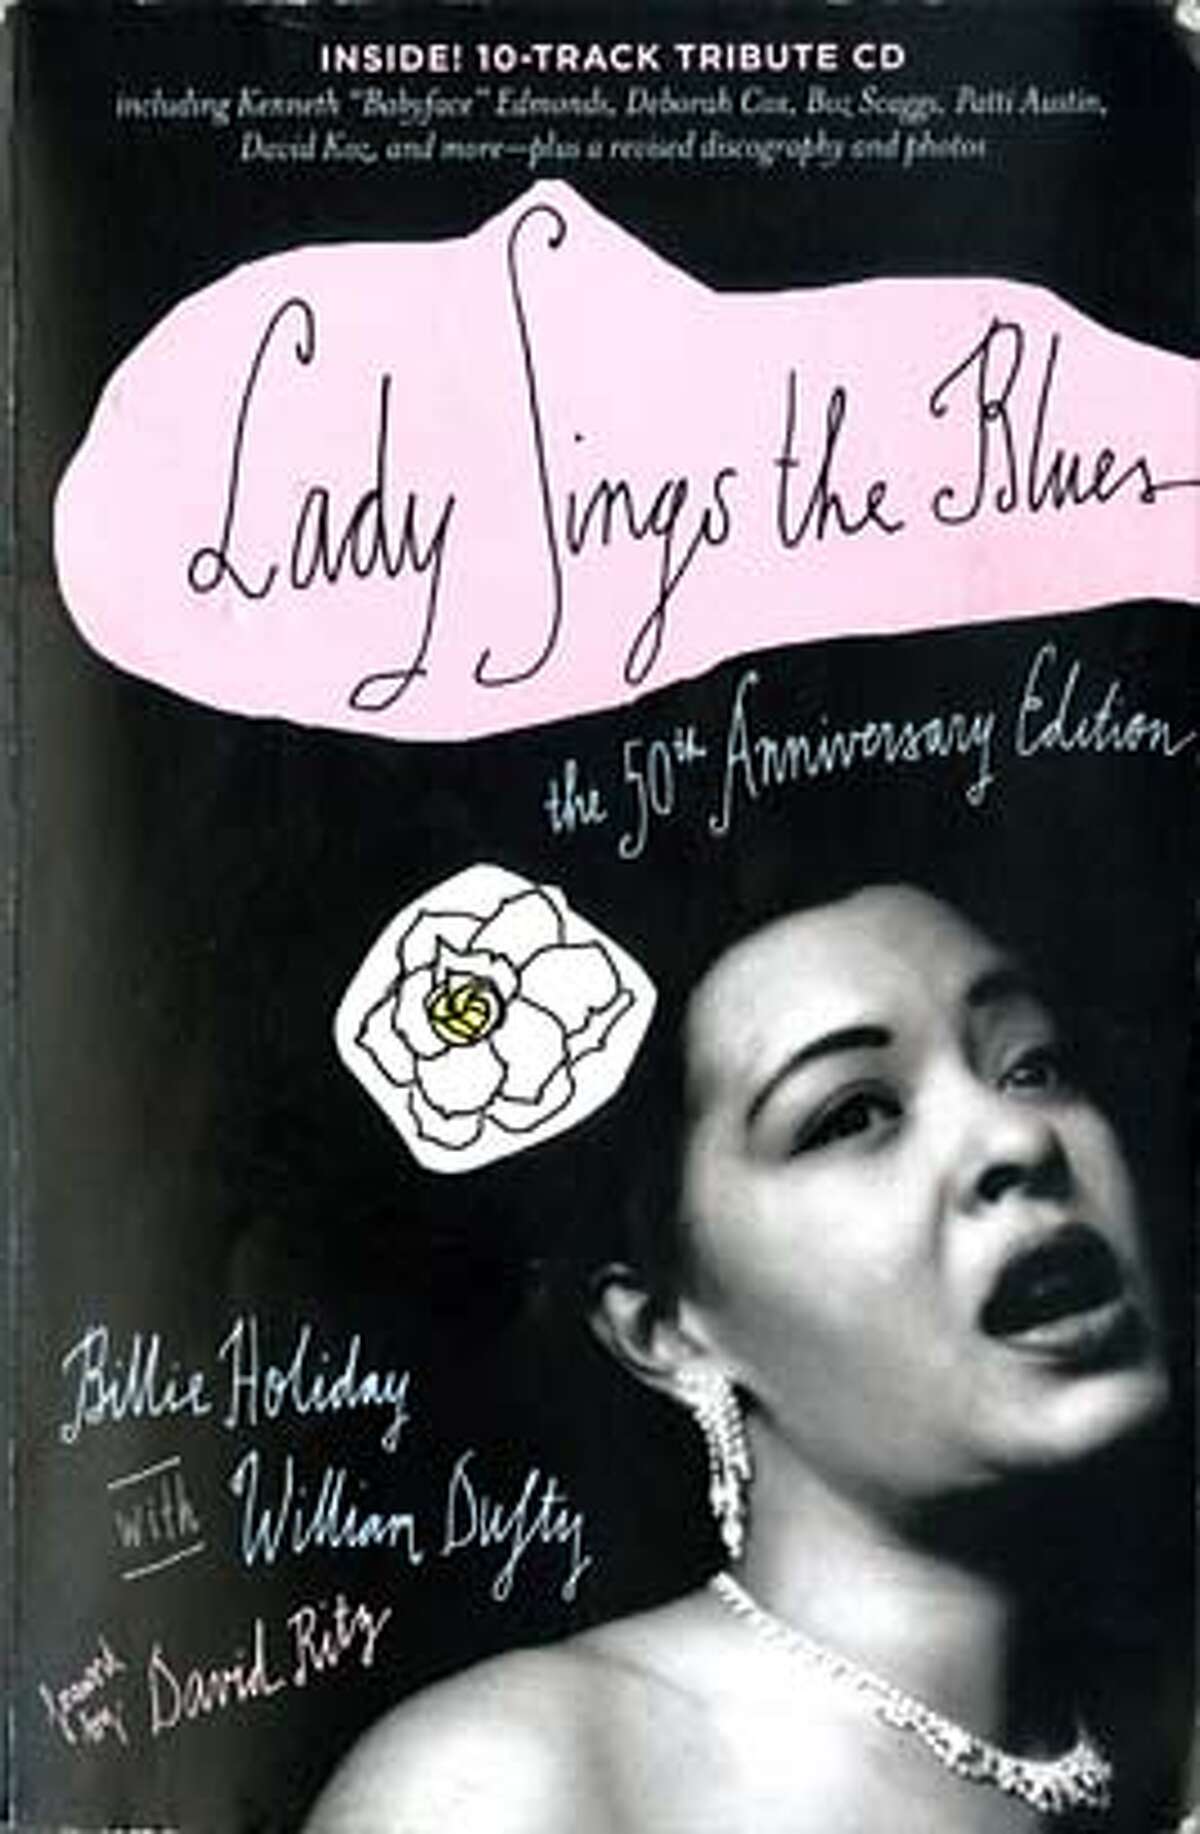 Cover of the 50th anniversary edition of "Lady Sings the Blues" by Billie Holiday and William Dufty